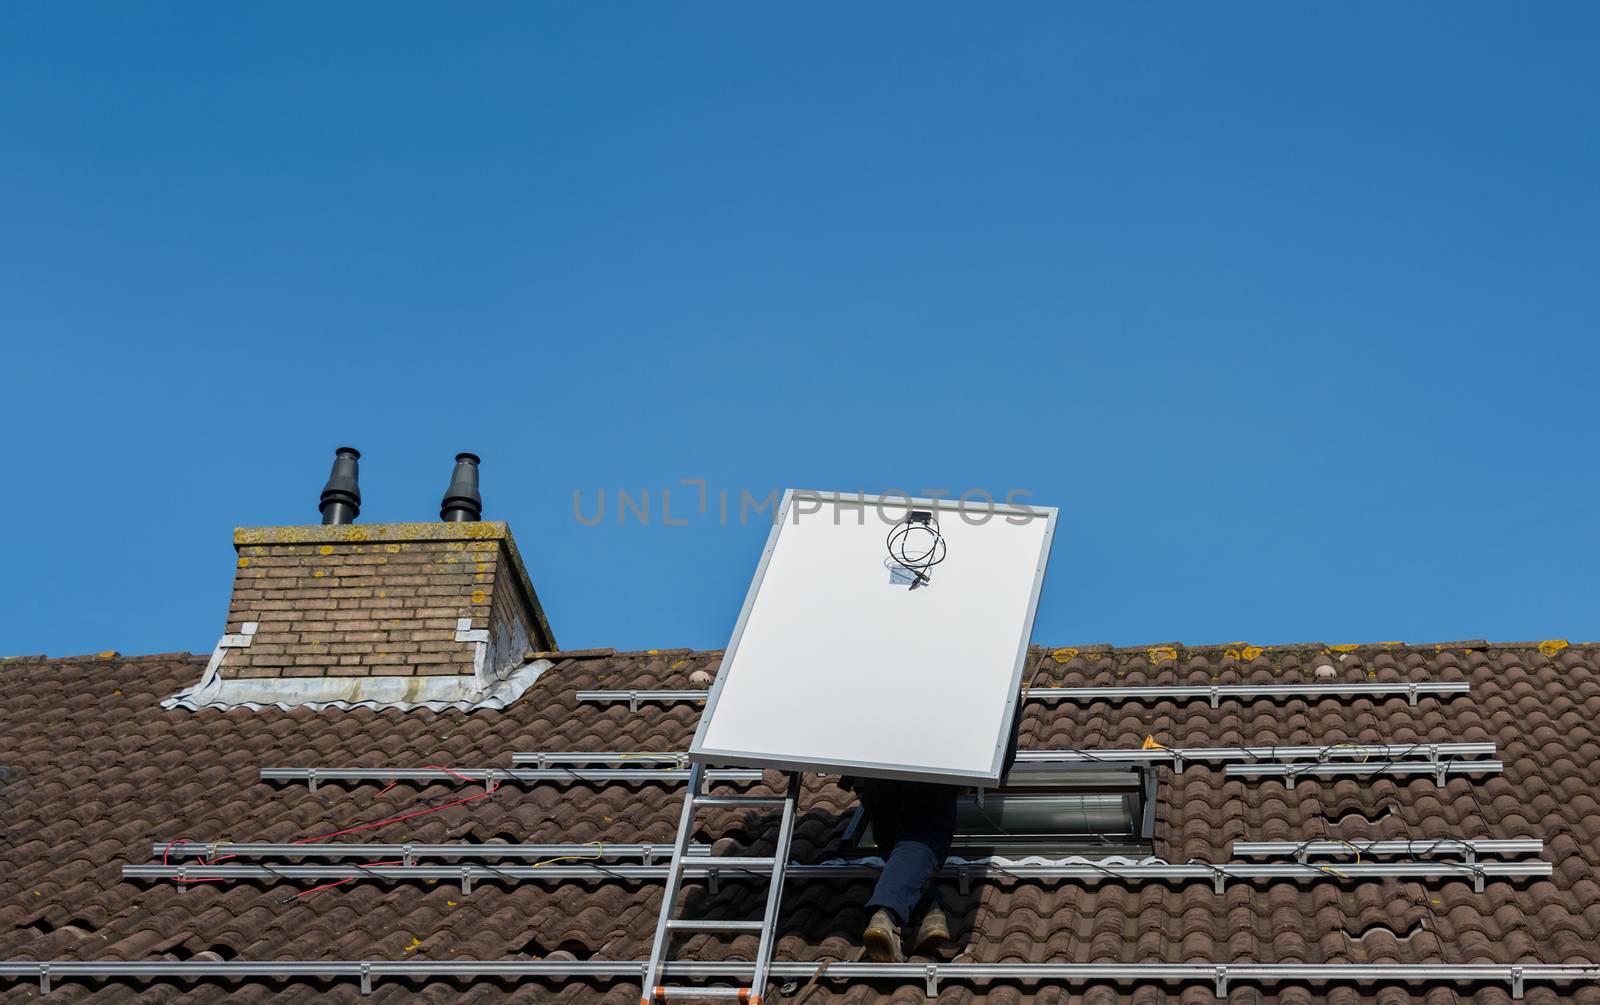 man climbing the ladder with solar panel by compuinfoto